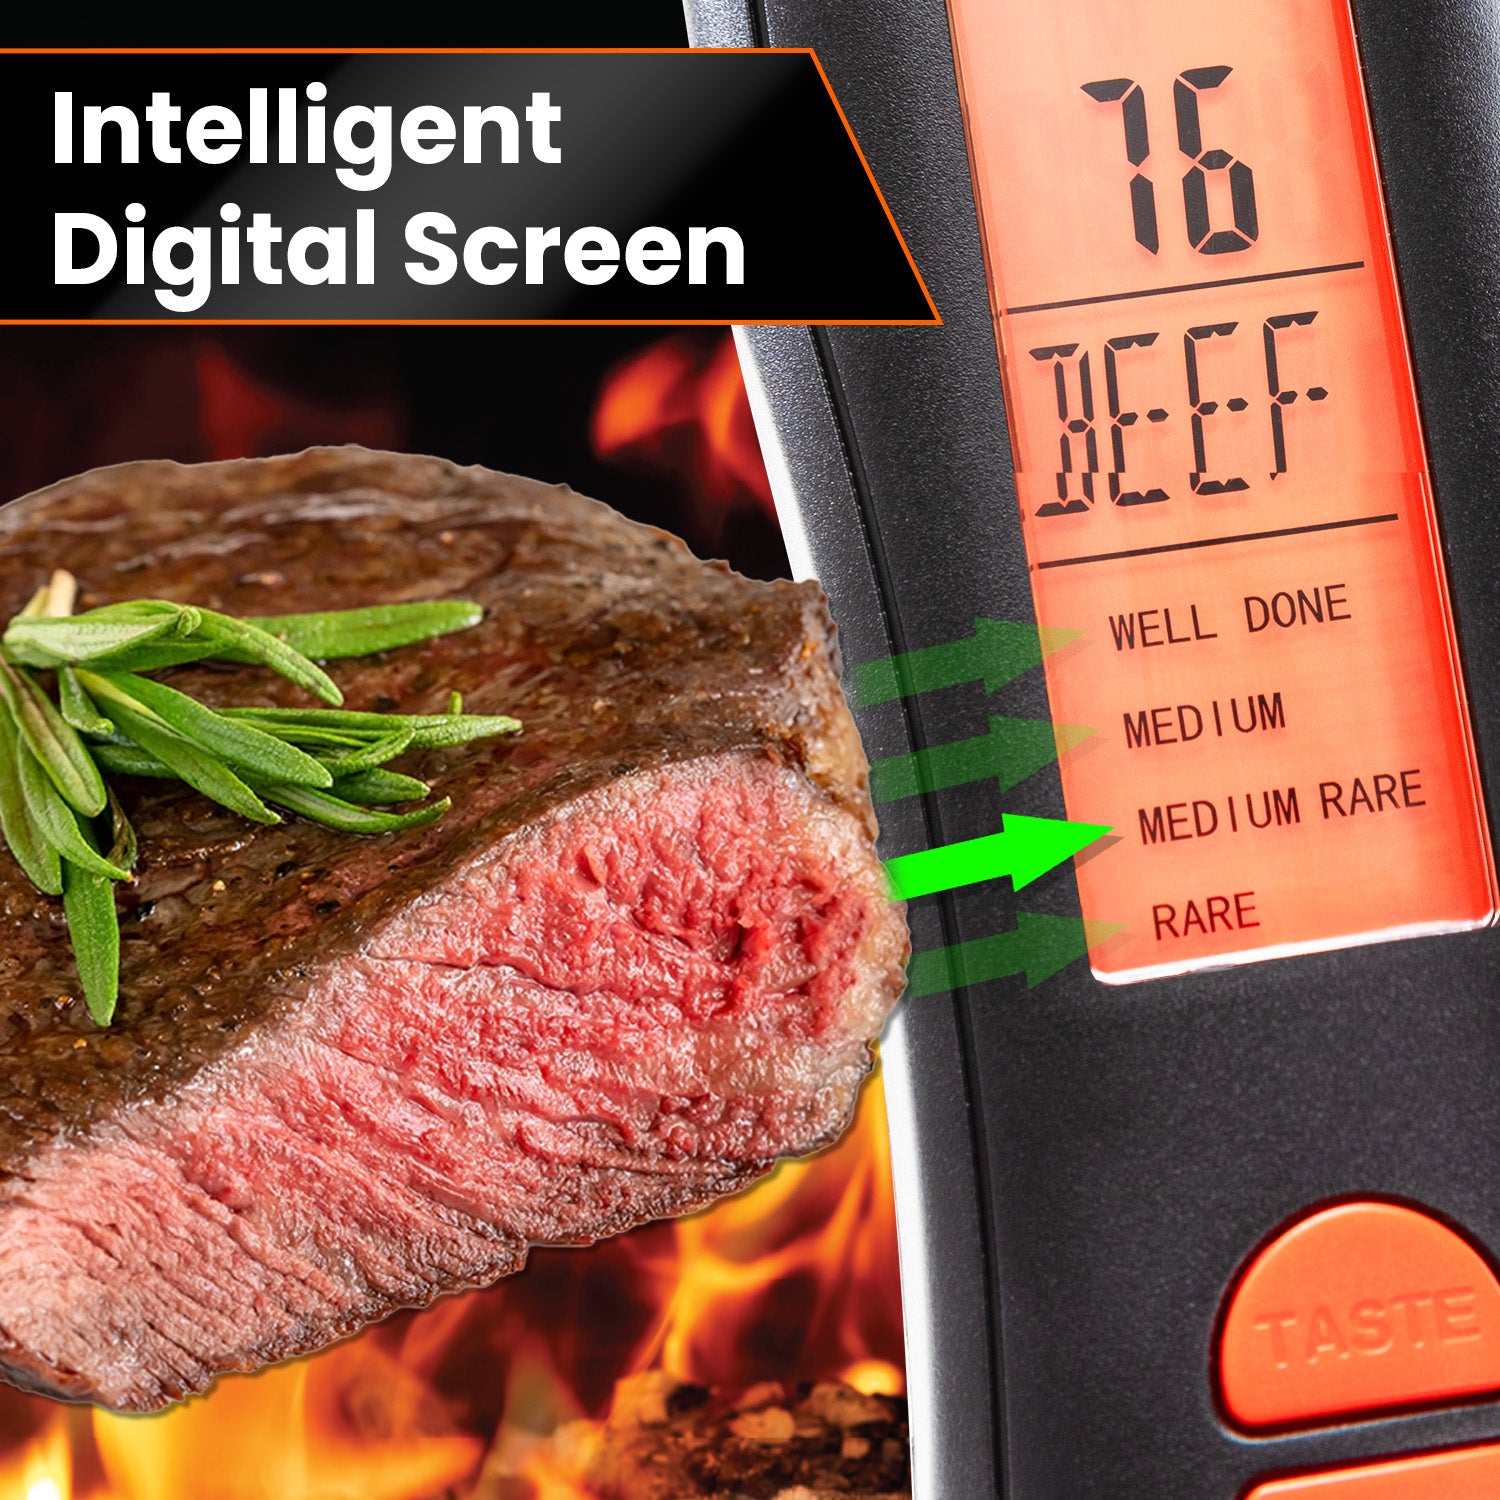 Ultimate Steak Thermometer Uses an LED Light To Tell You When Steak Is Done